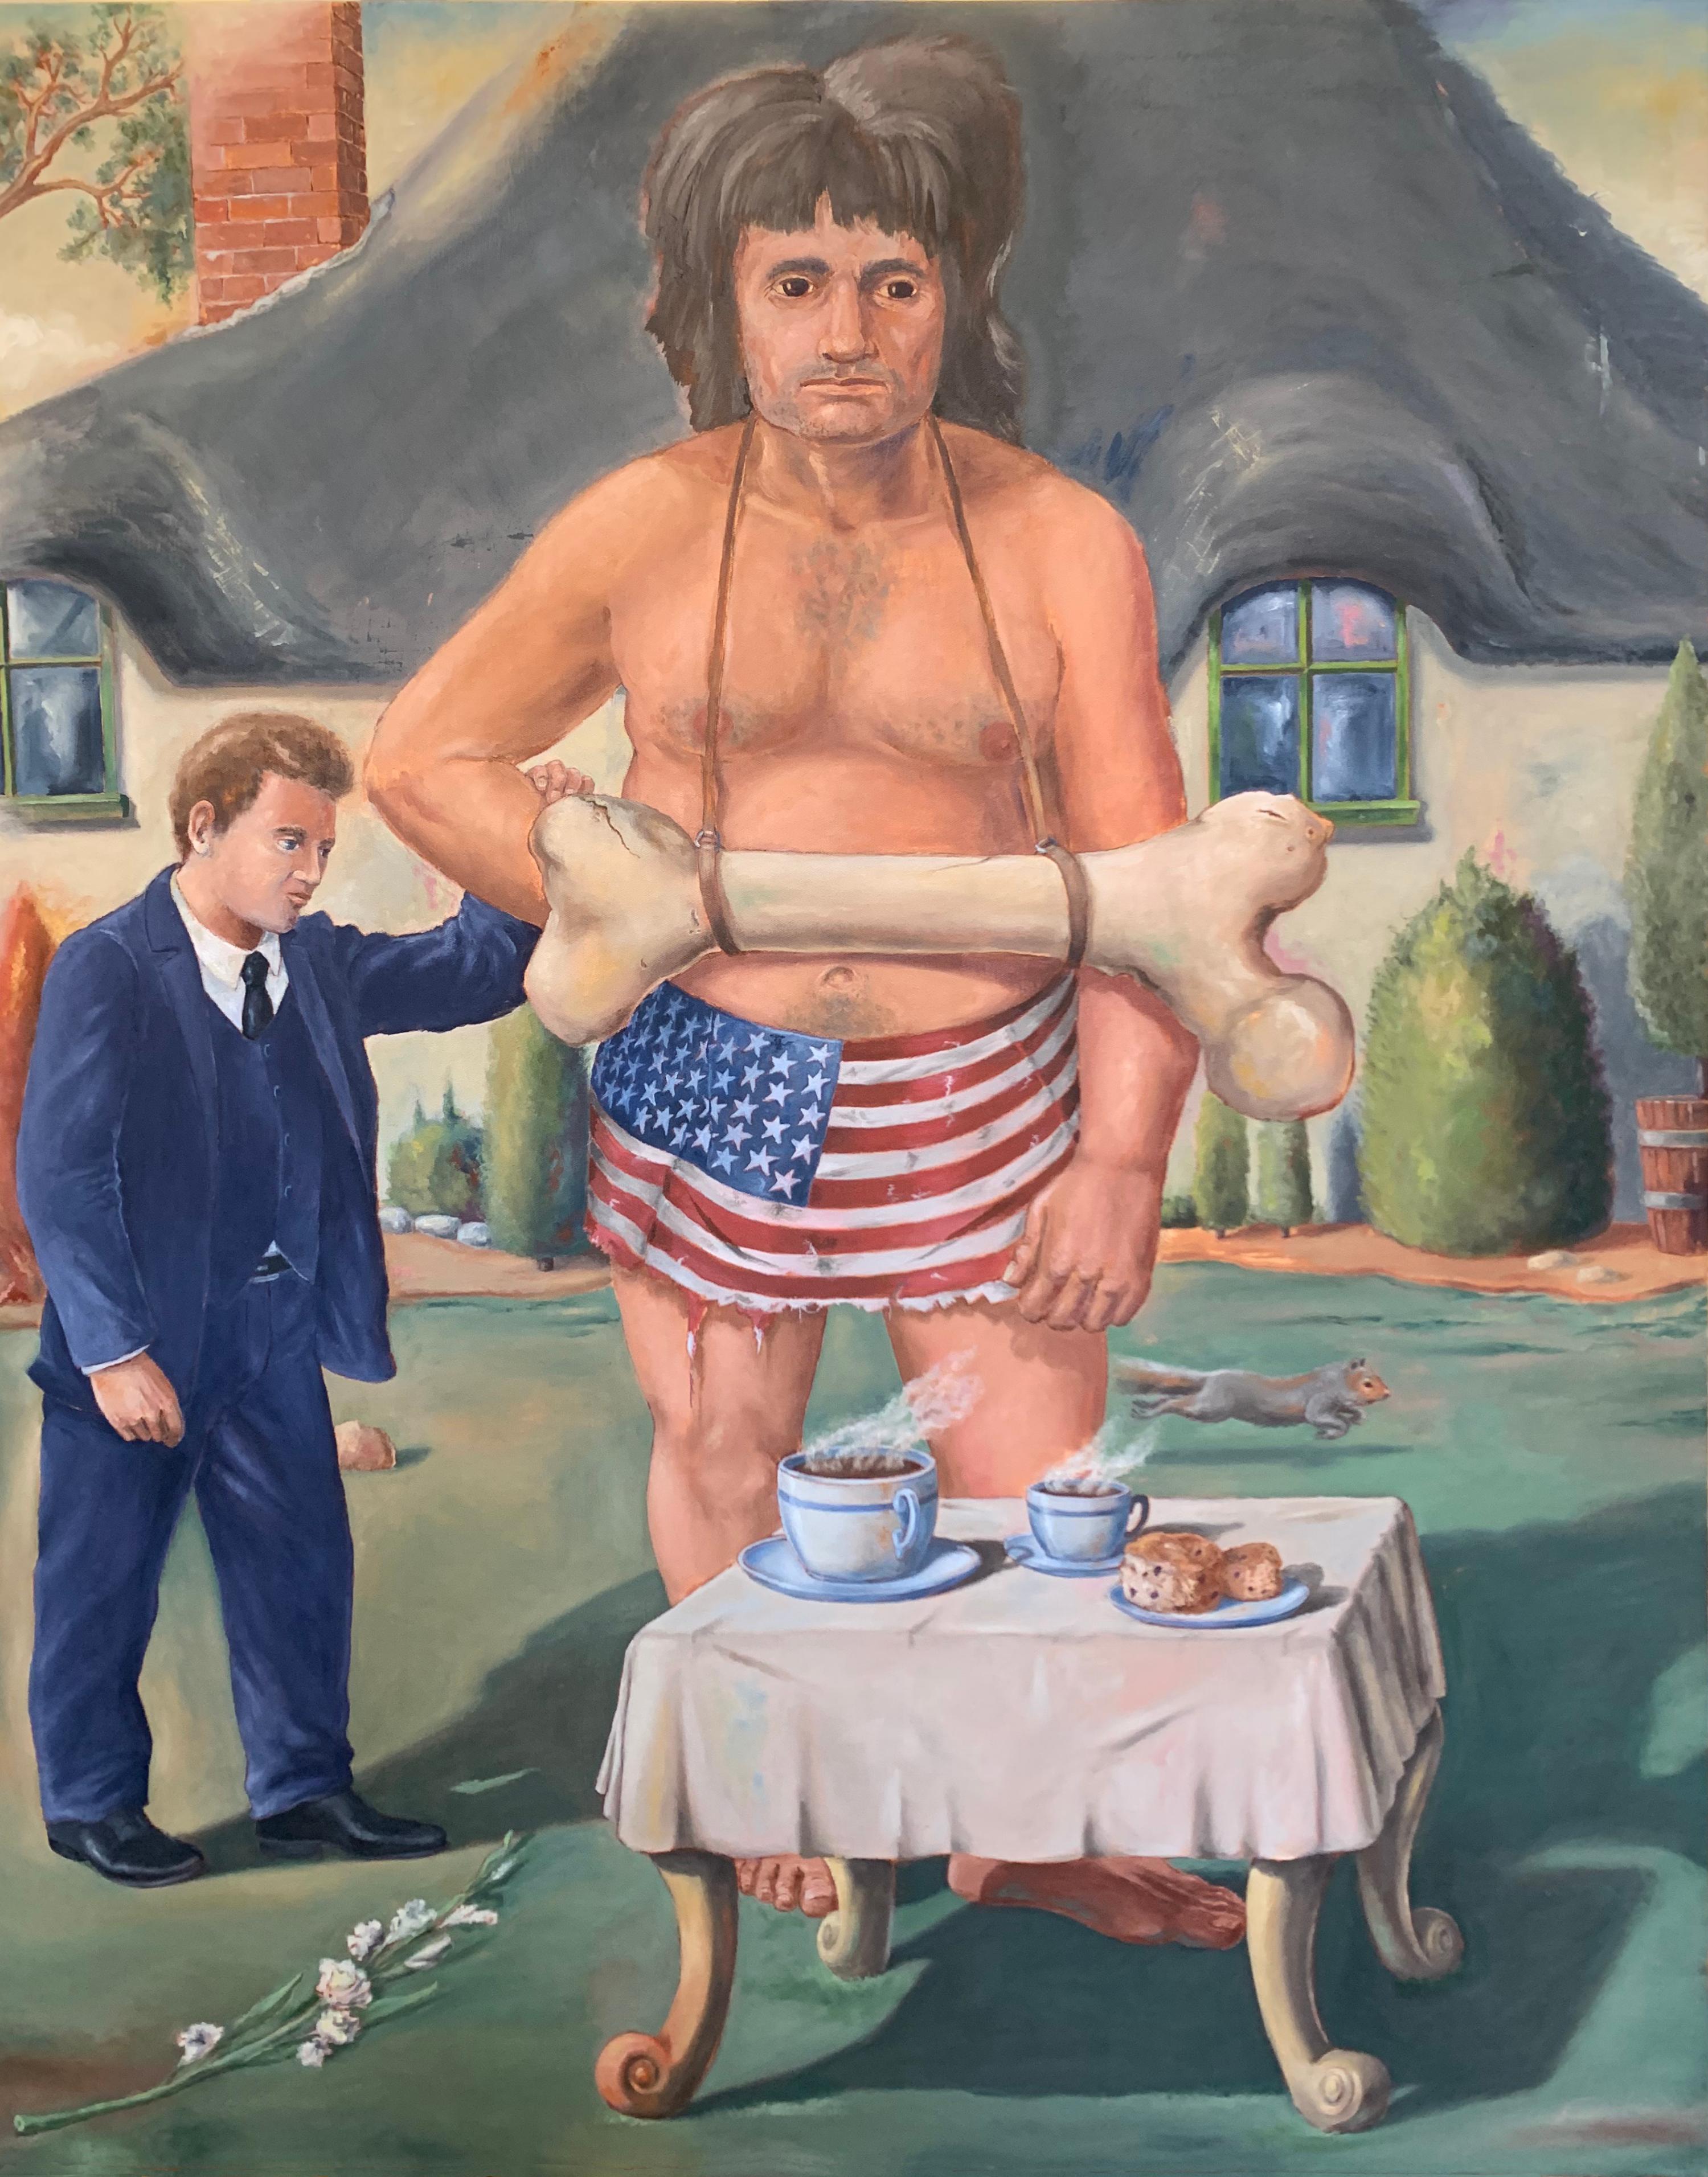 "TOUR GIANT", surrealist painting, American flag, bone, cottage, cups, storybook